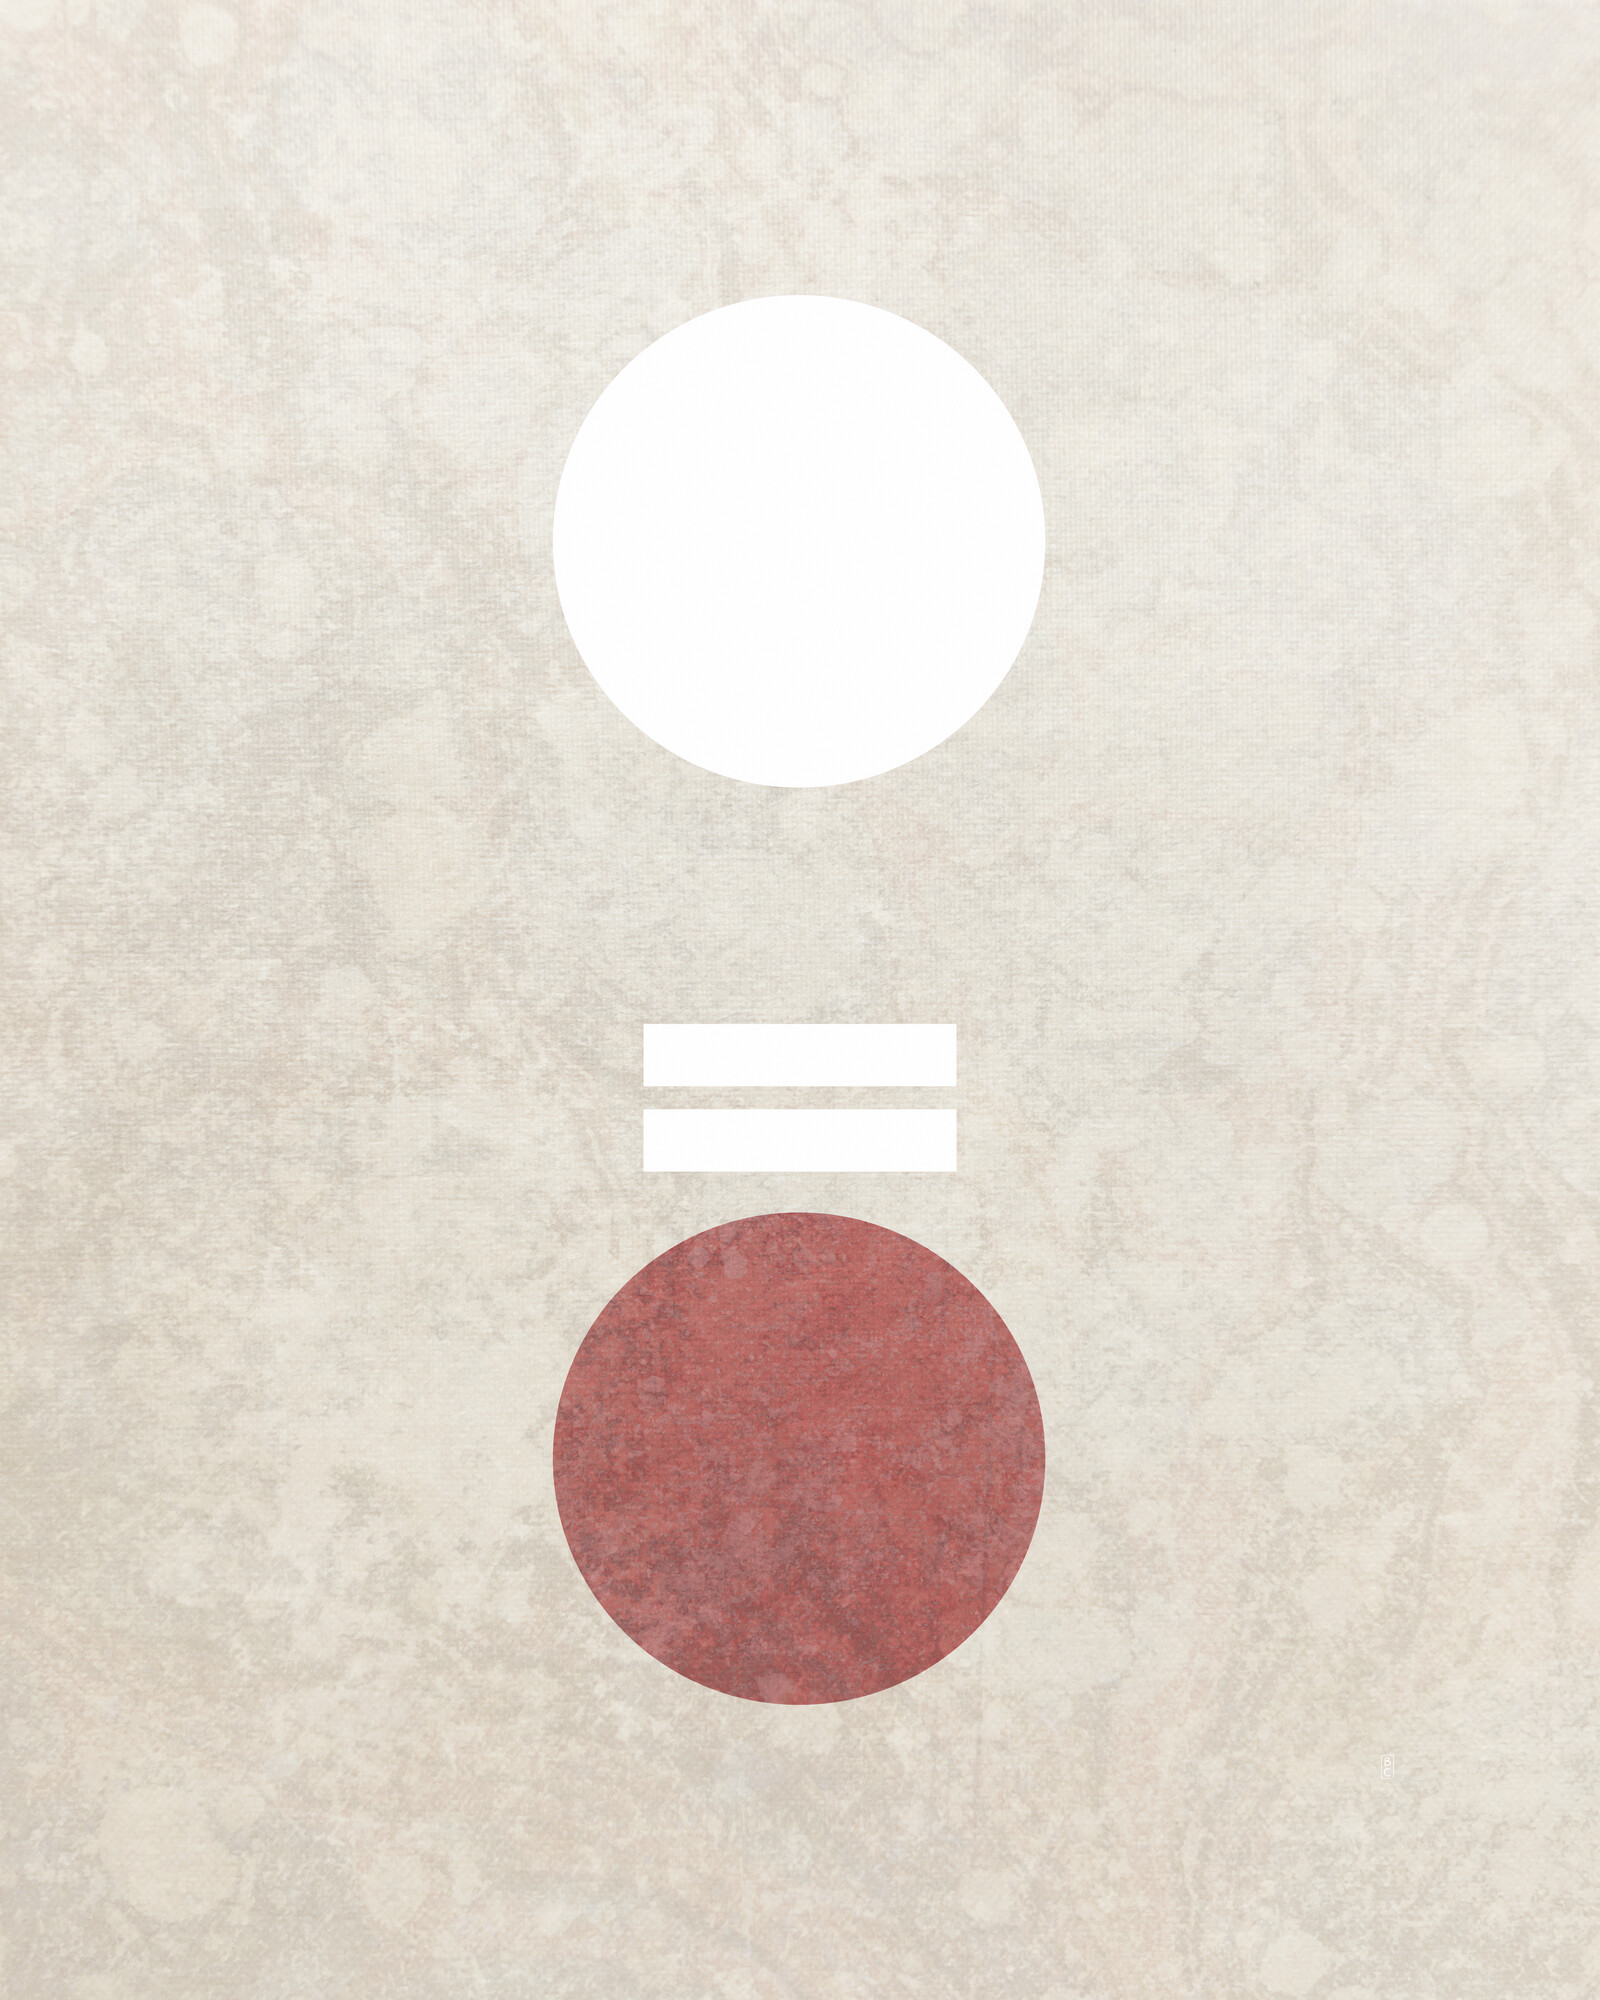 Top to bottom: a white circle, two smaller horizontal lines, and a red circle.